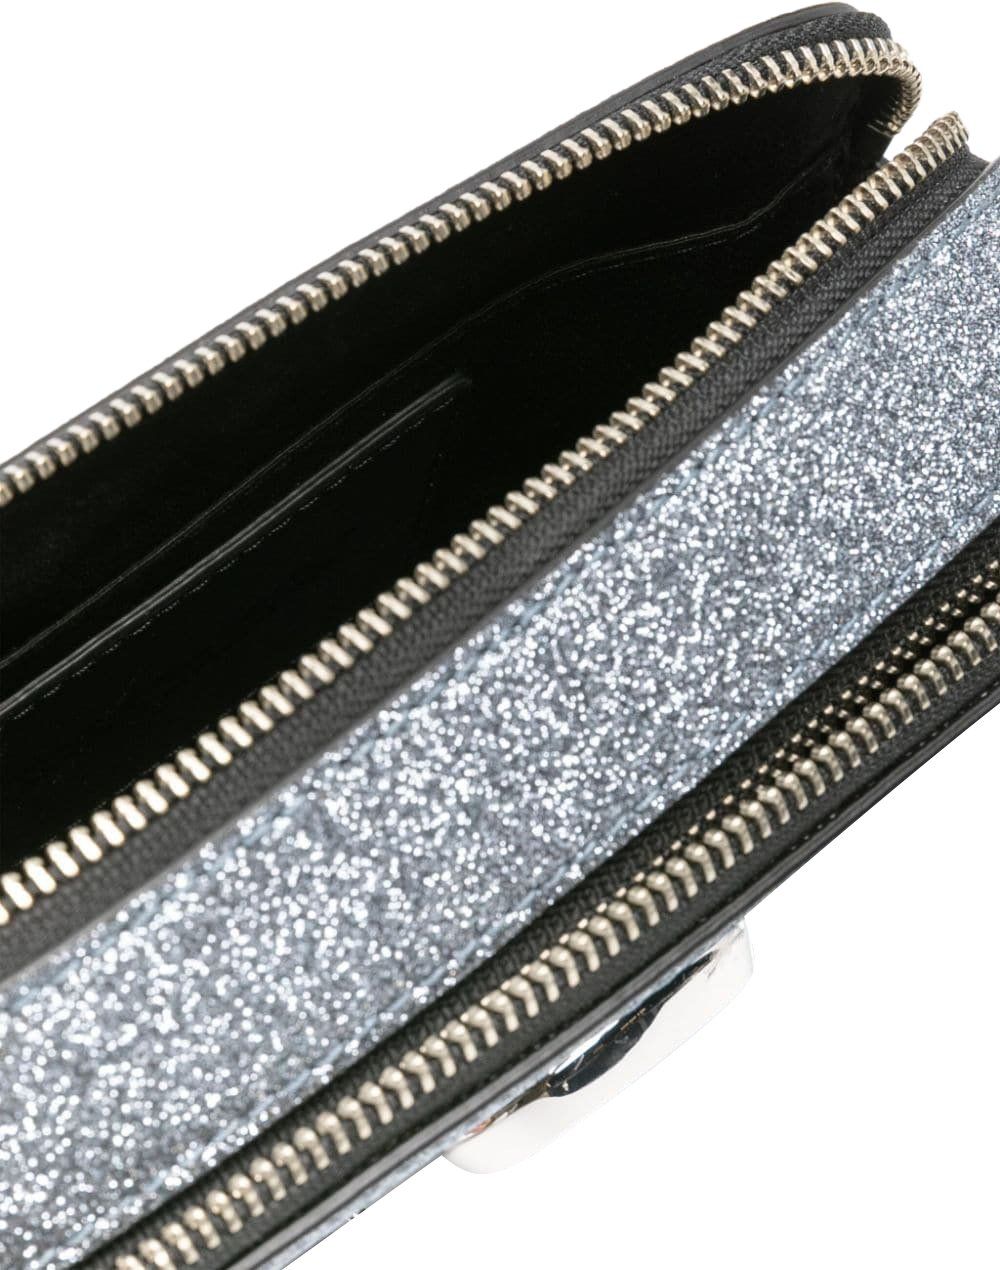 Marc Jacobs Bags Silver Zilver